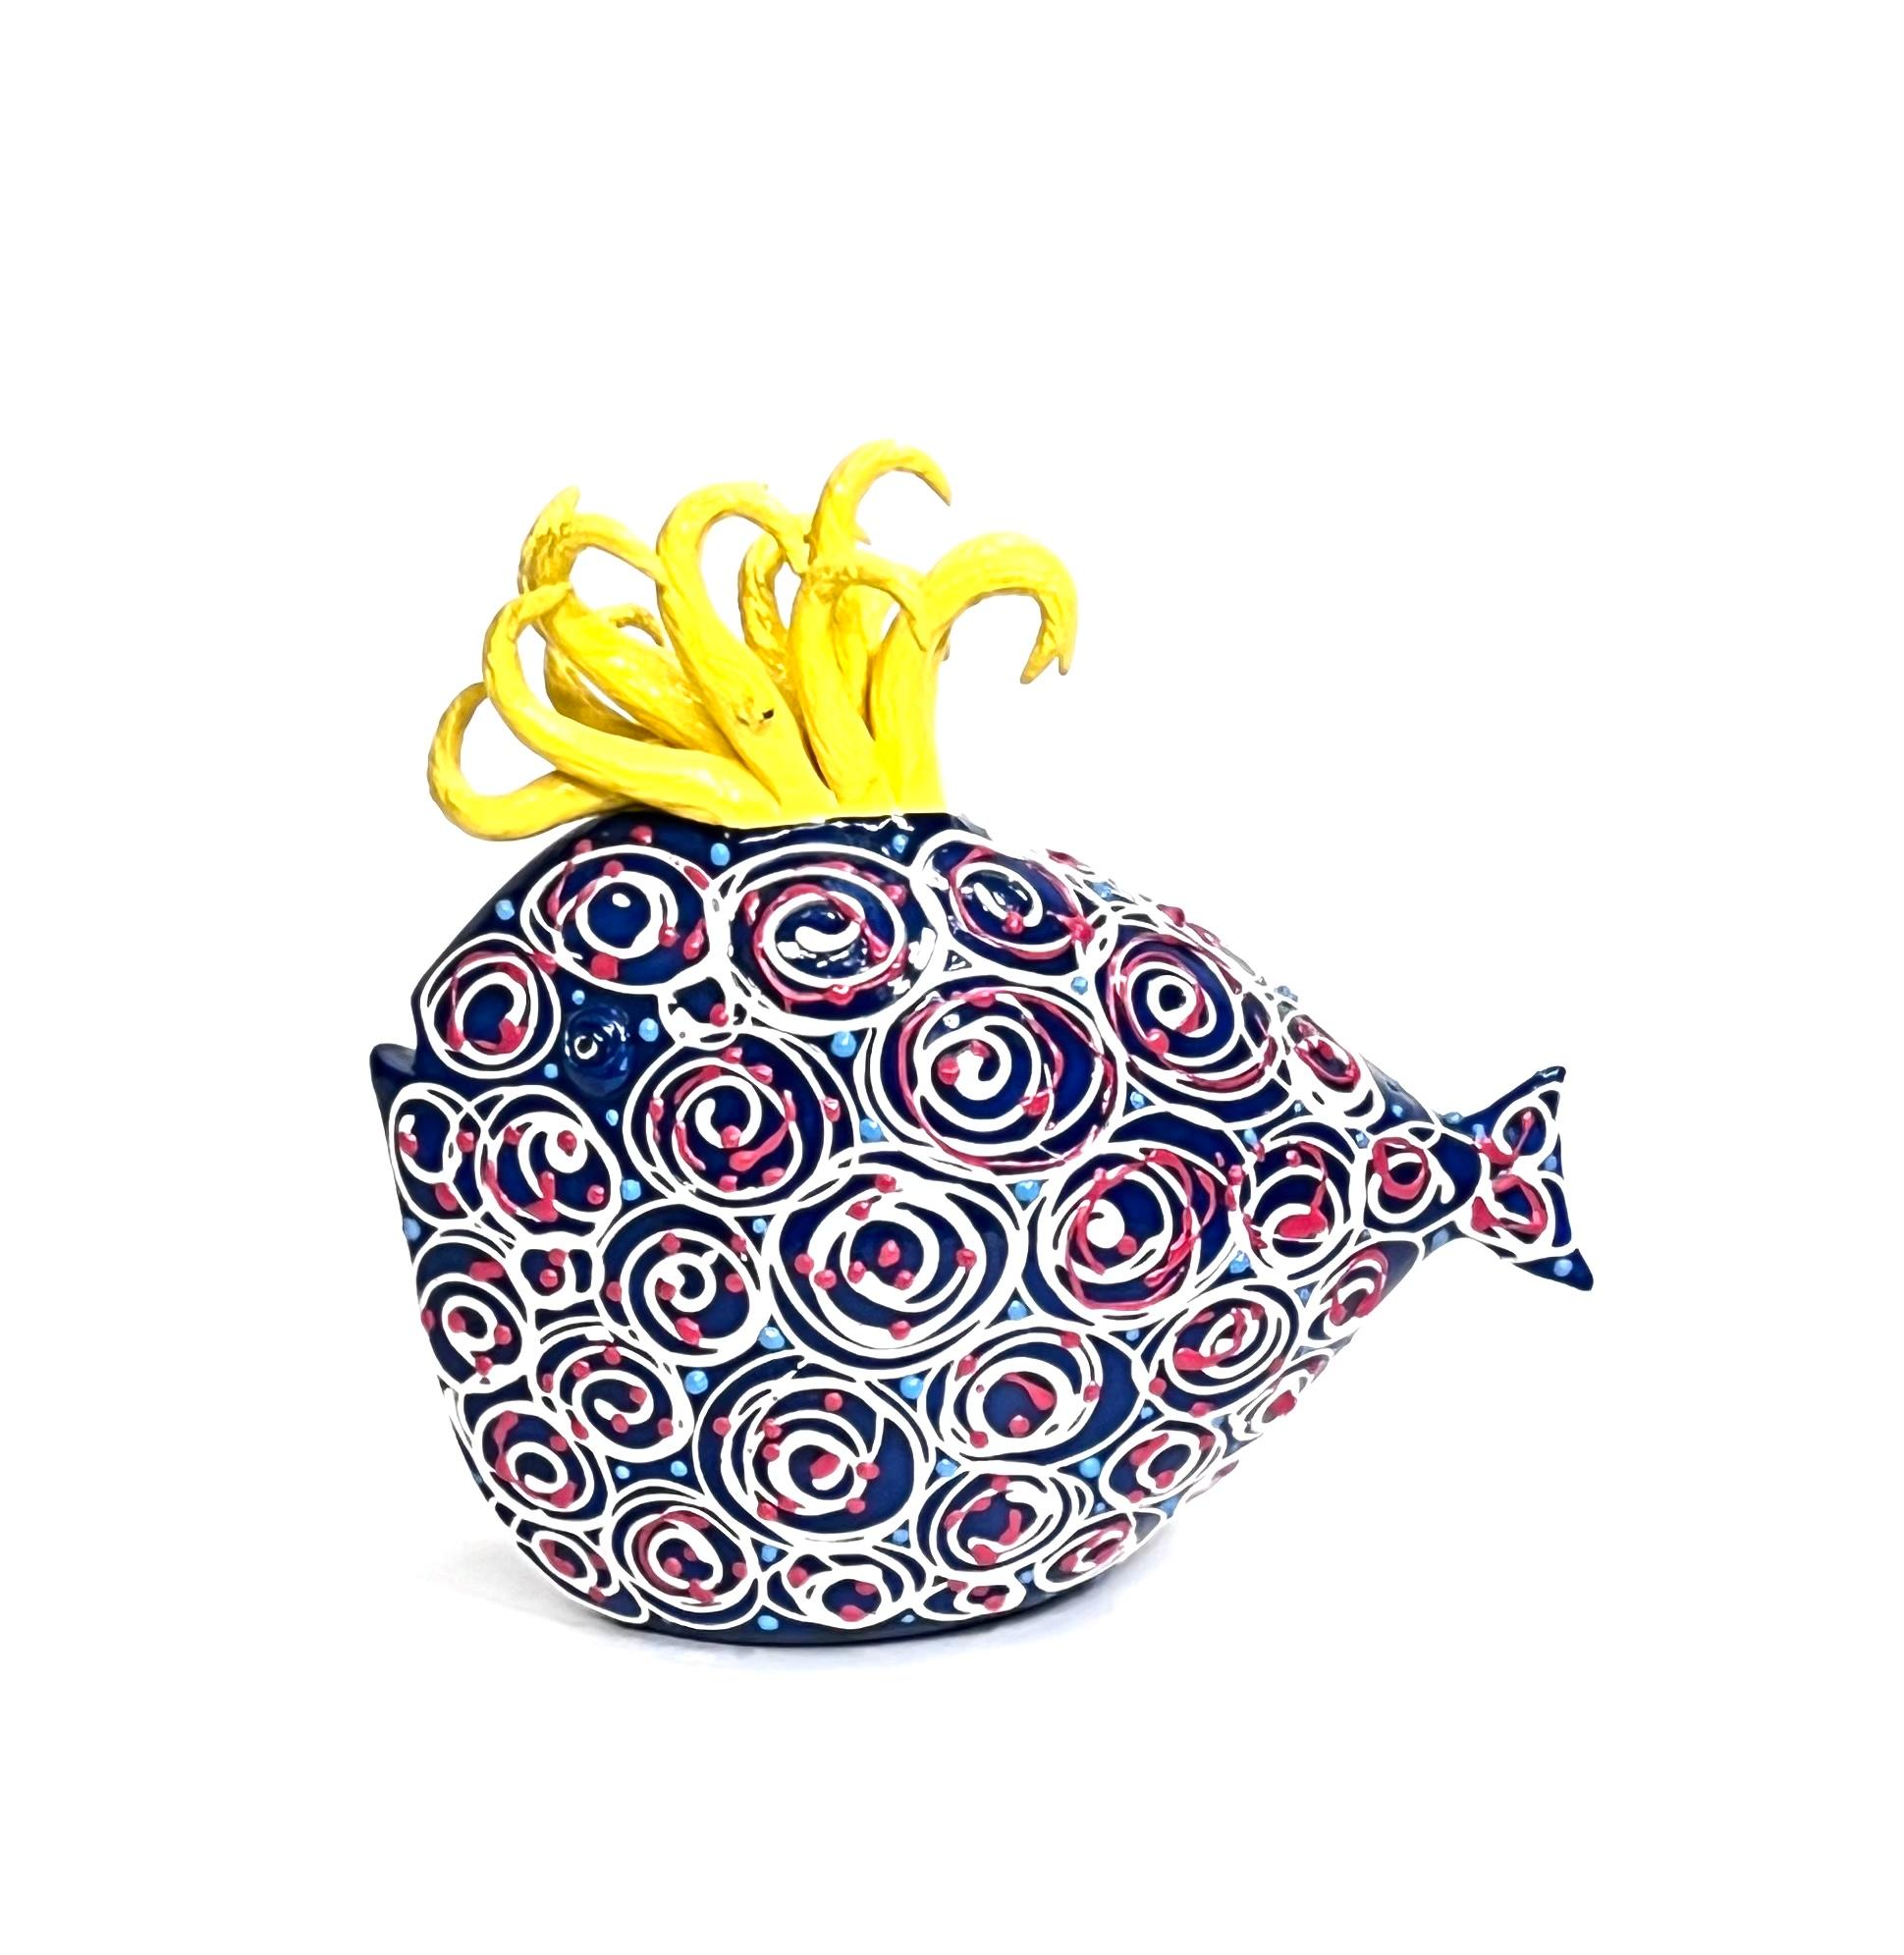 Mosche Bianche is glad to add those wonderful fishes to its collection. The fishes are all handmade and bespoke: choose the colors and shape you like! Our artisans can make also customized different sizes. Ask us for more!